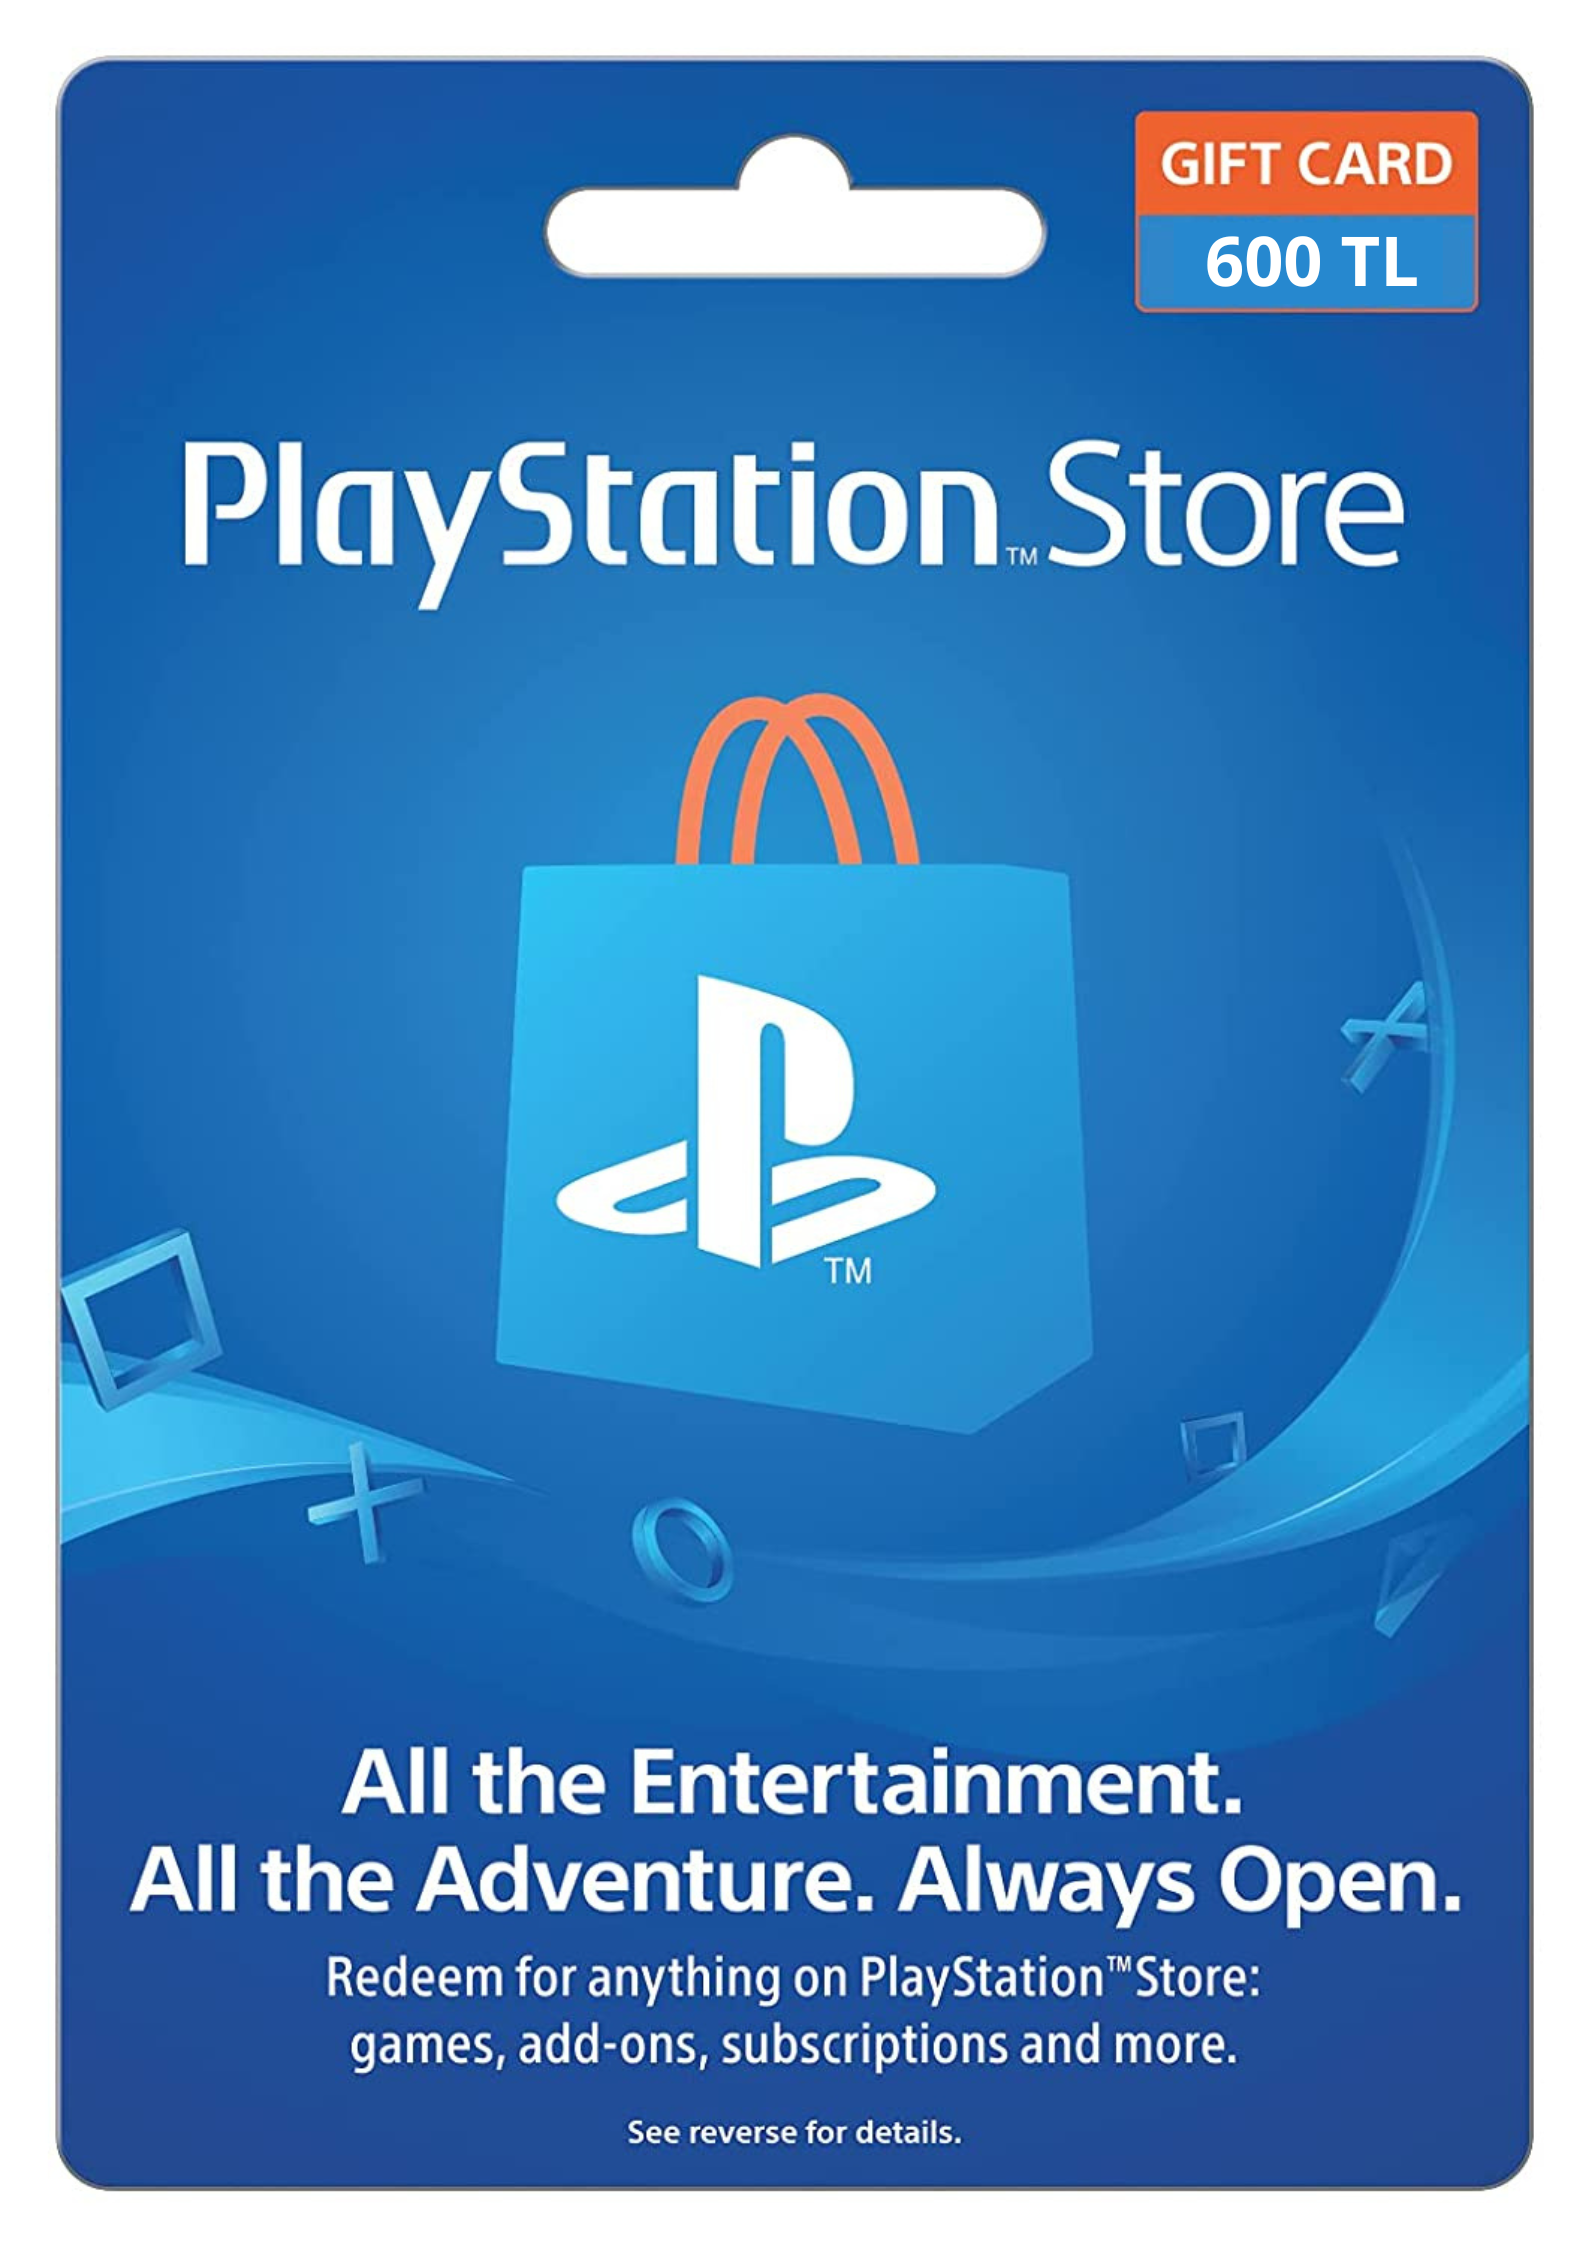 How to Buy PS Games🎁from turkey region from playstation